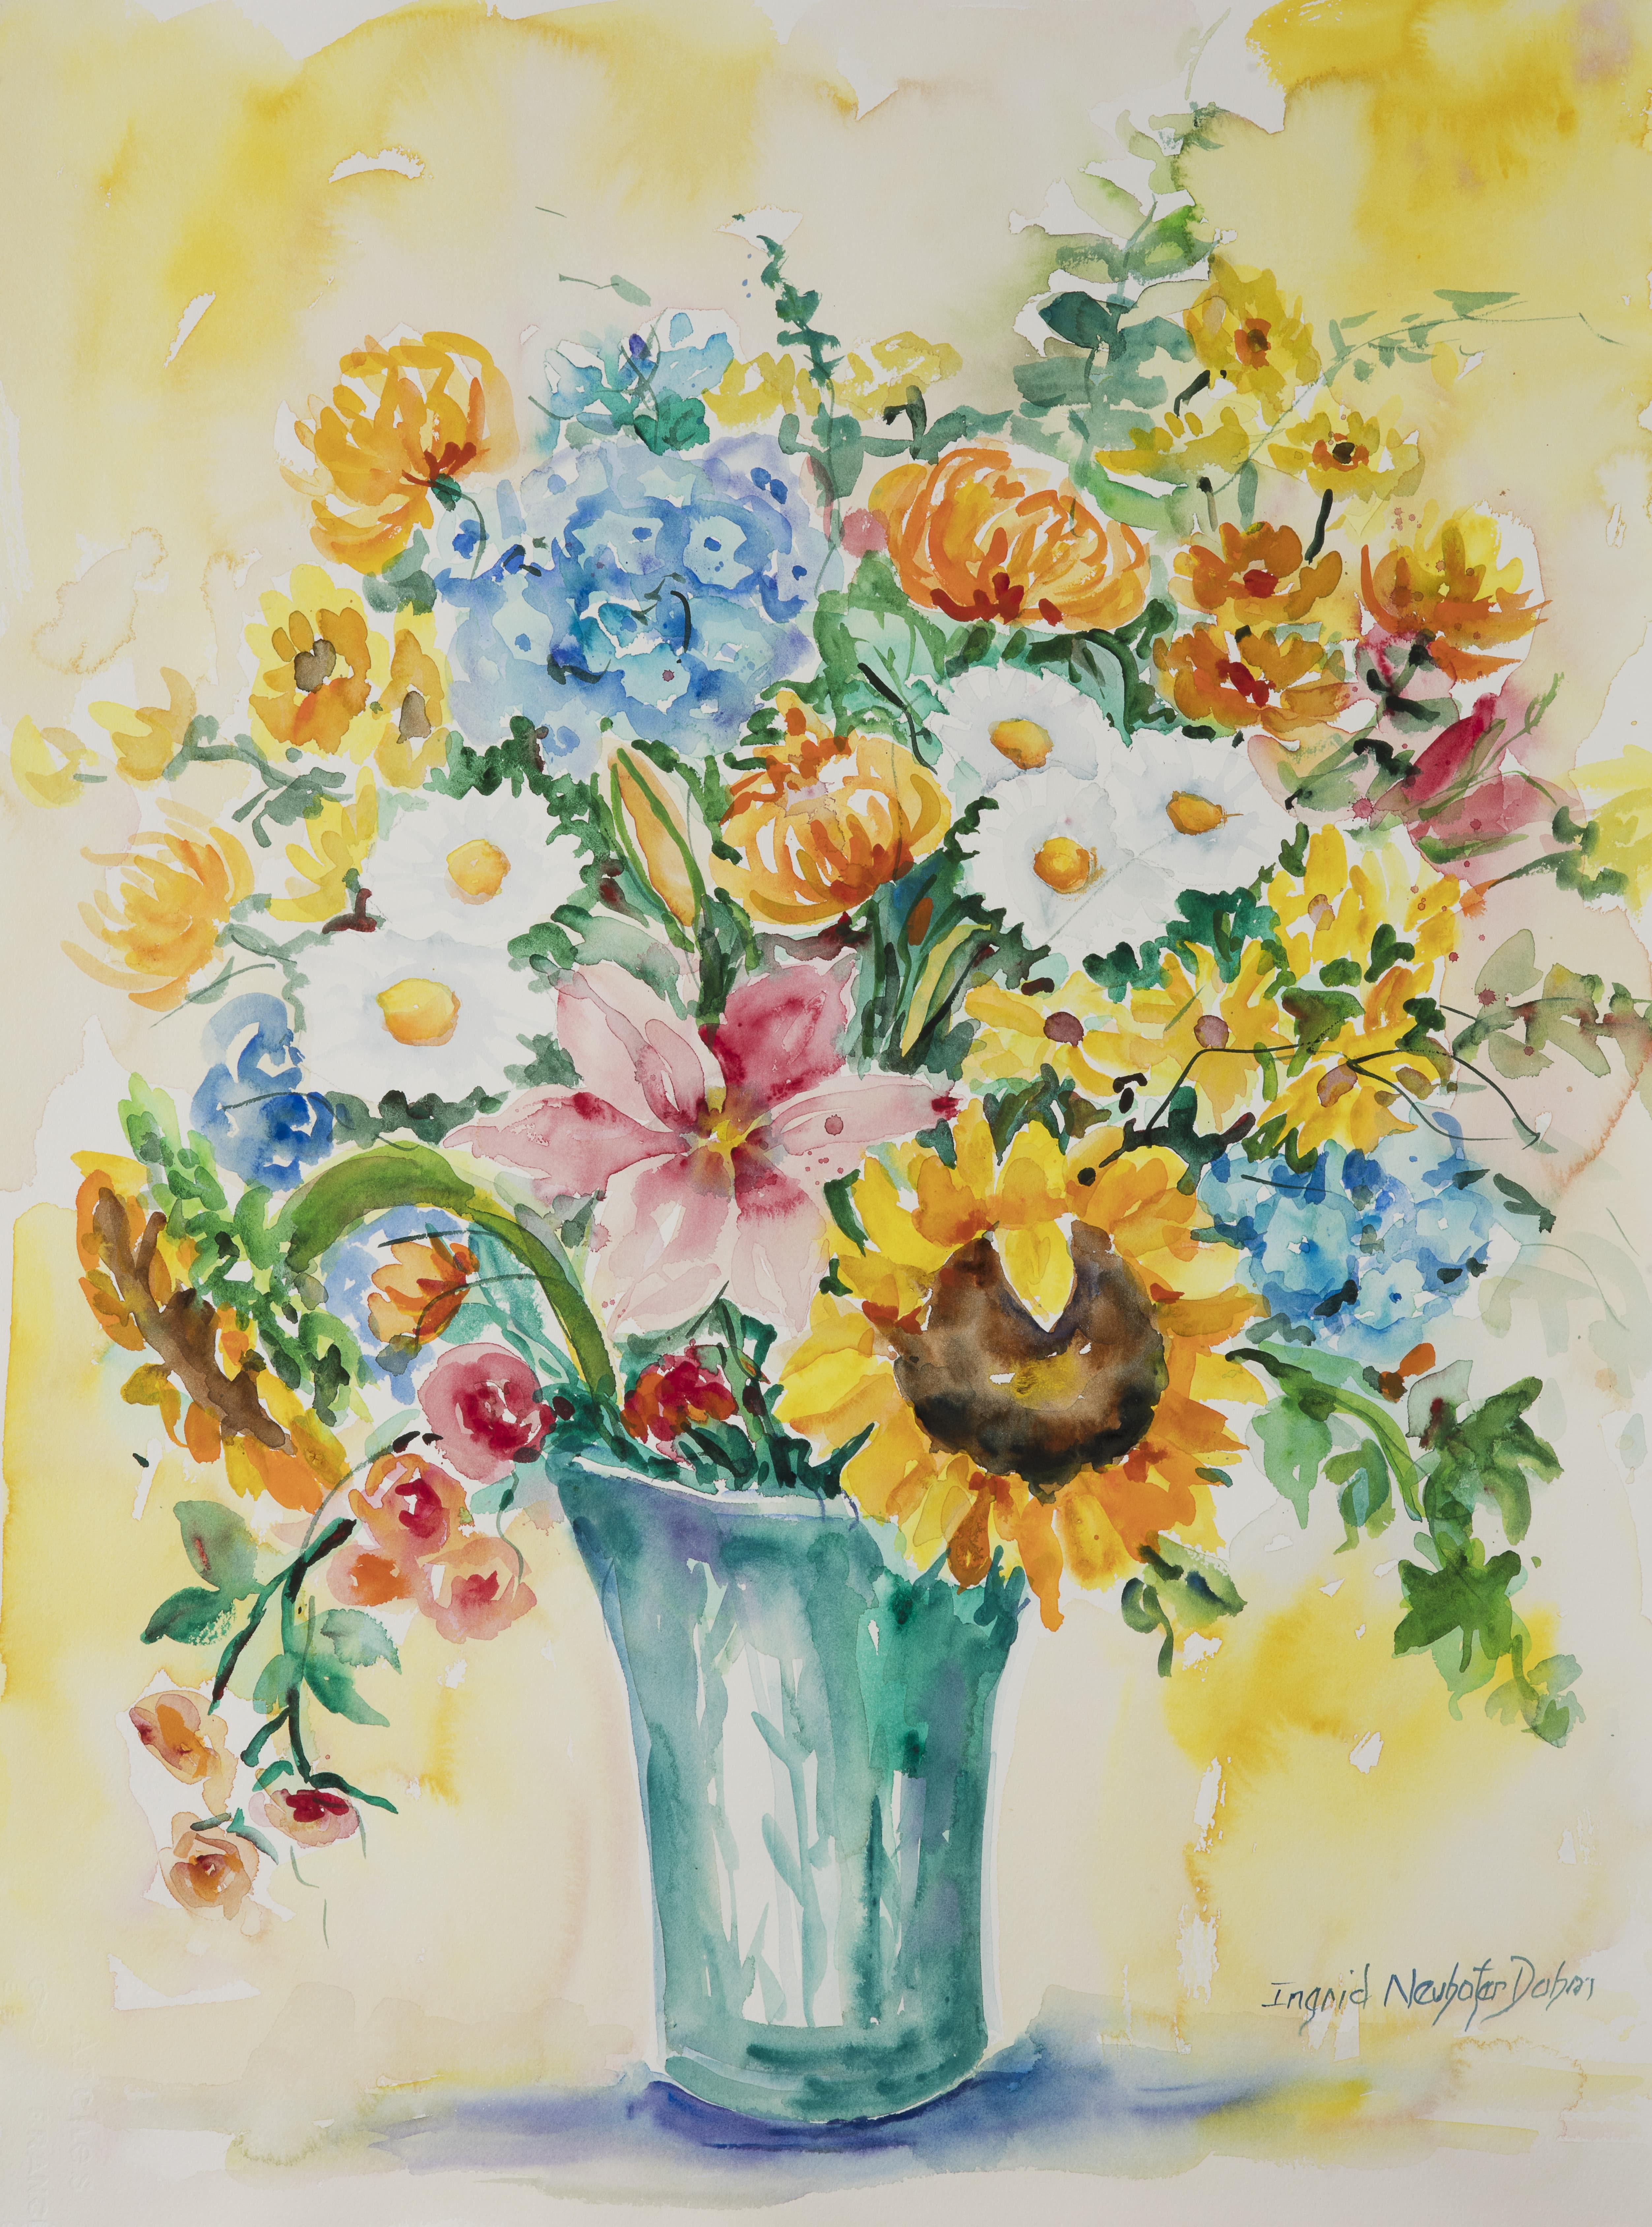 Ingrid Dohm Still-Life - Sunflower and Daises, Original Watercolor Painting, 2017